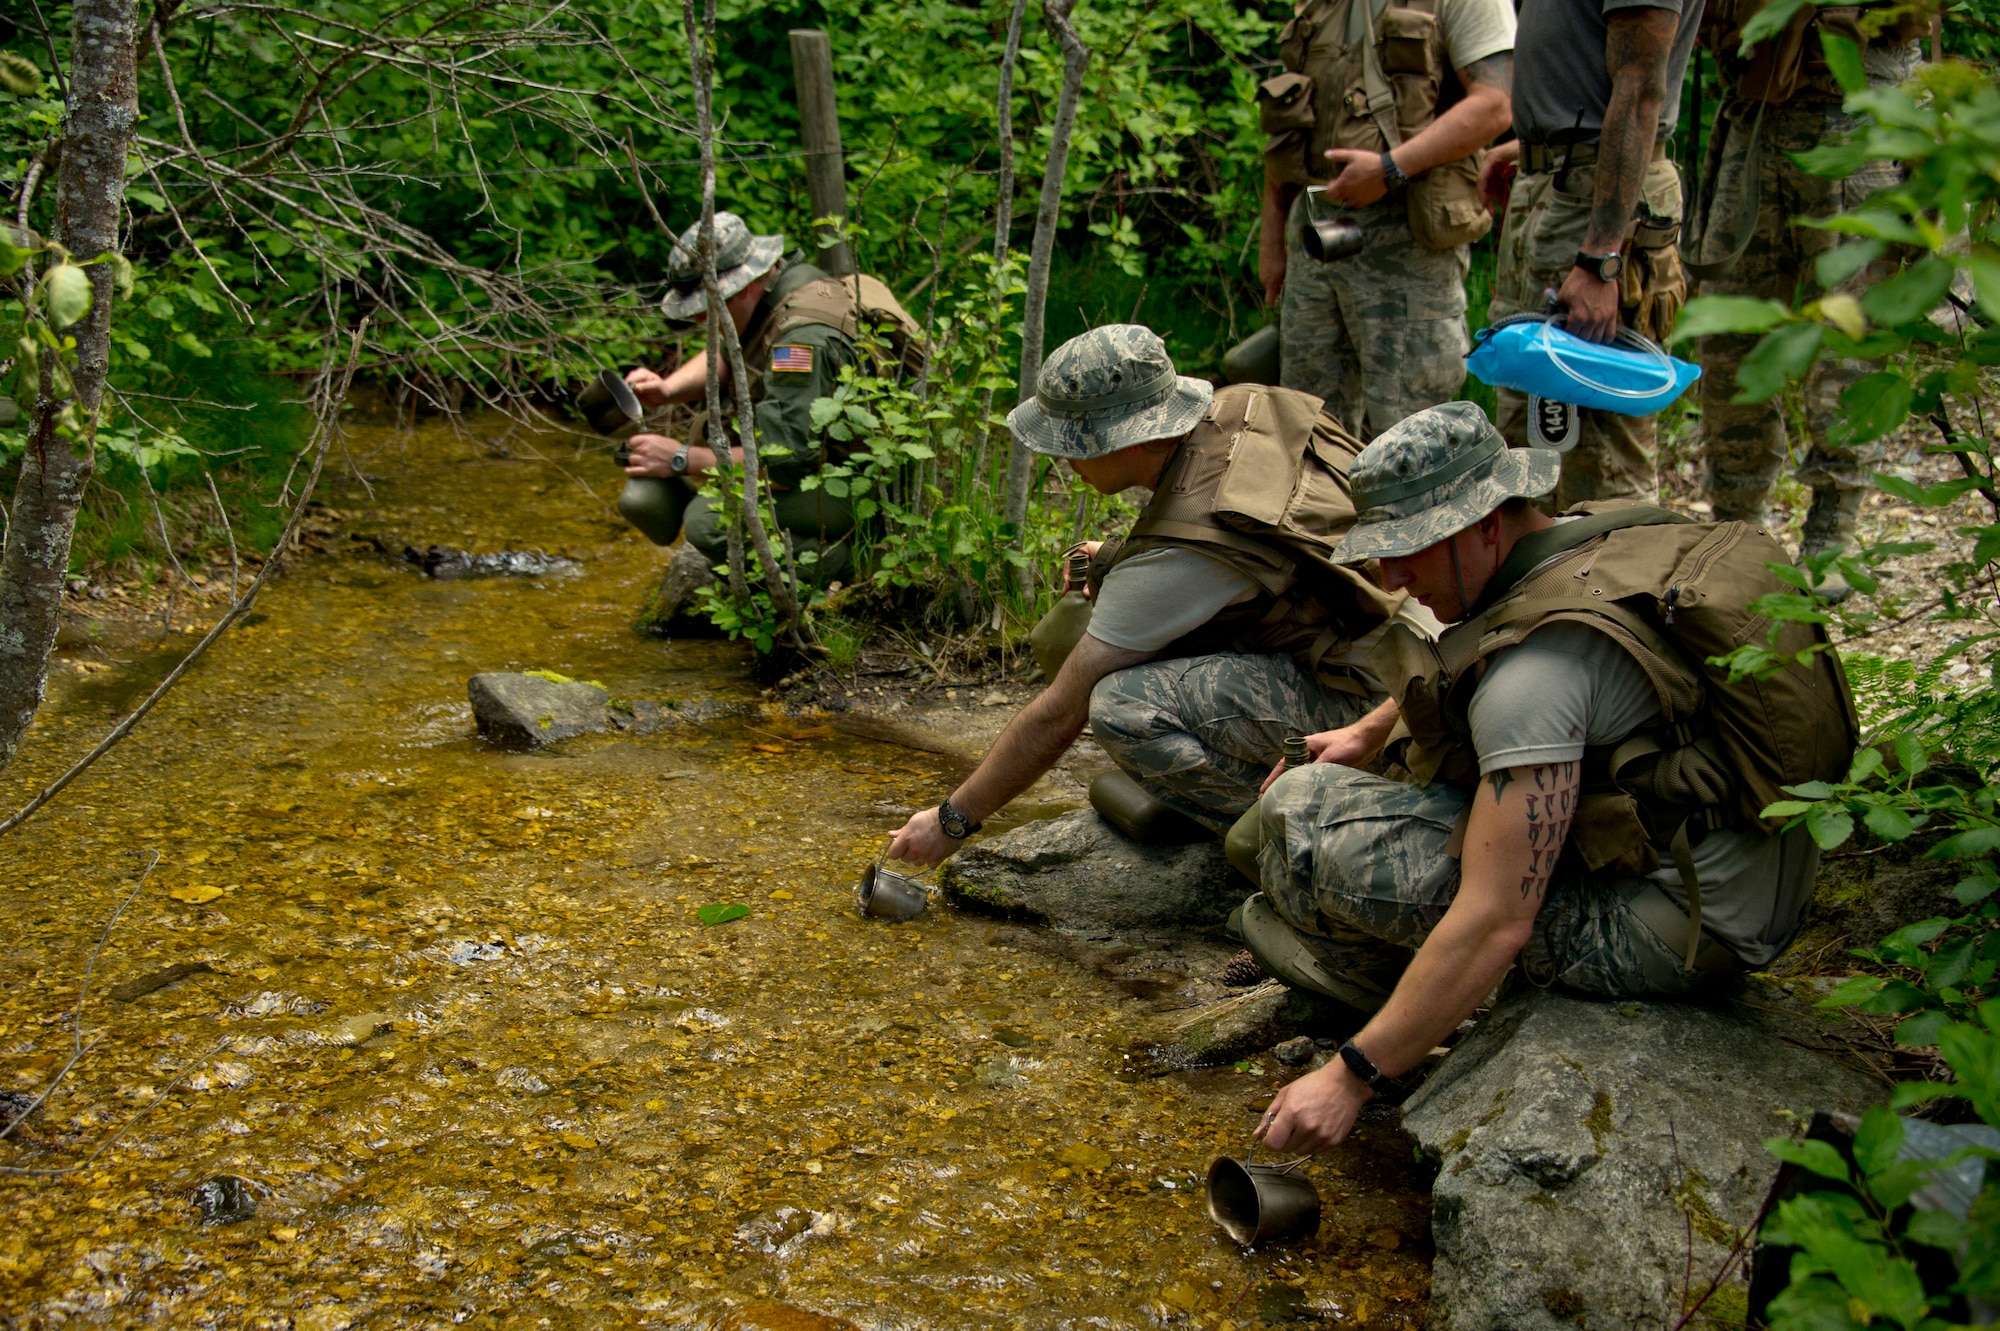 S-V-80-A combat survival students gather water from a stream June 13, 2015, in the Colville National Forest, Wash. To prevent water-borne illness from occurring, the students learned to add iodine tablets or bleach to purify the gathered water. The students also learned that leaving a bottle of water in the sun will result in water purification by the sun’s ultraviolet rays. (U.S. Air Force photo/Airman 1st Class Nicolo J. Daniello)